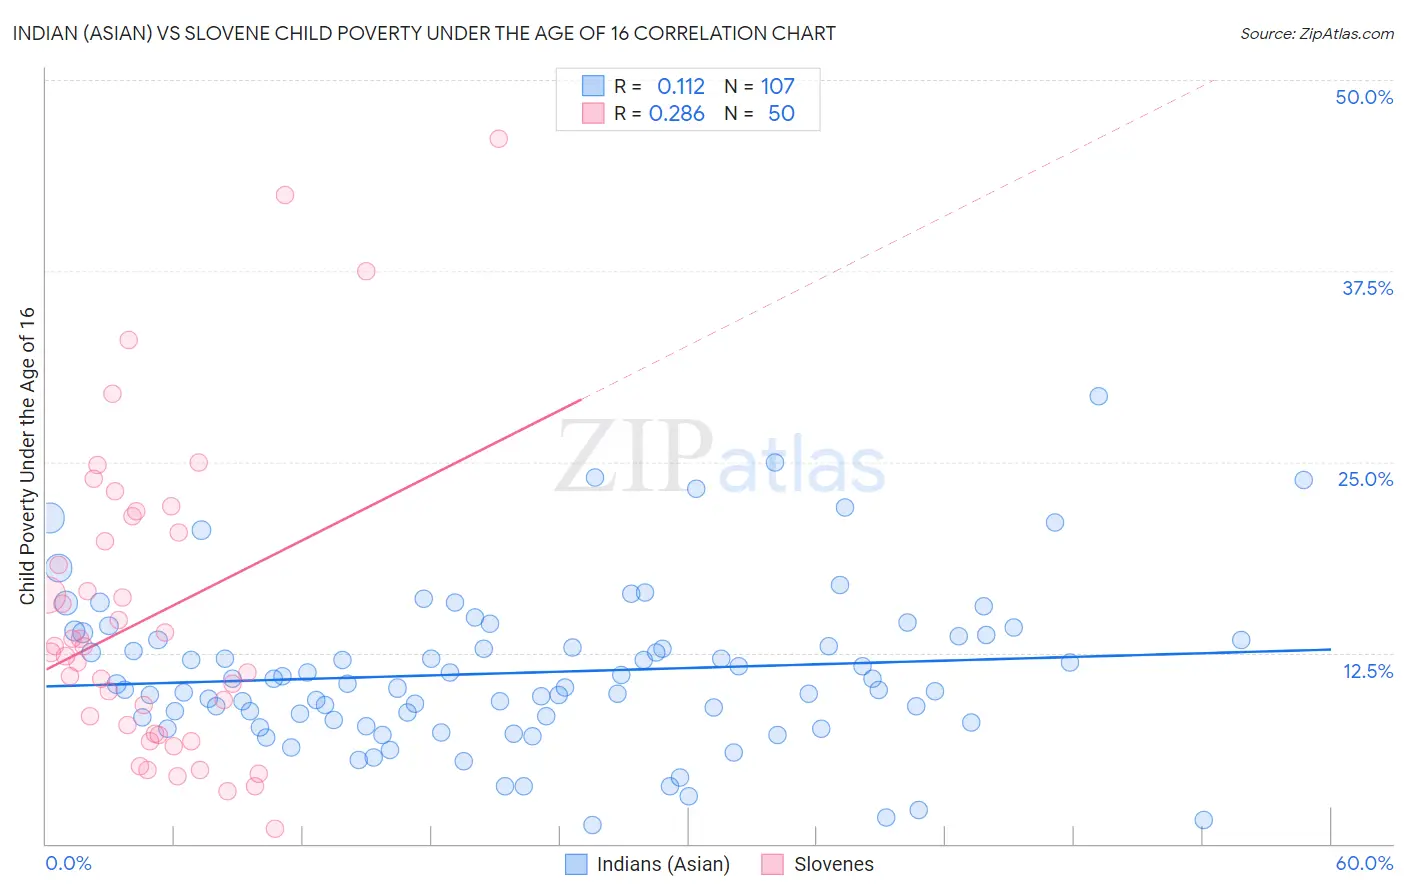 Indian (Asian) vs Slovene Child Poverty Under the Age of 16